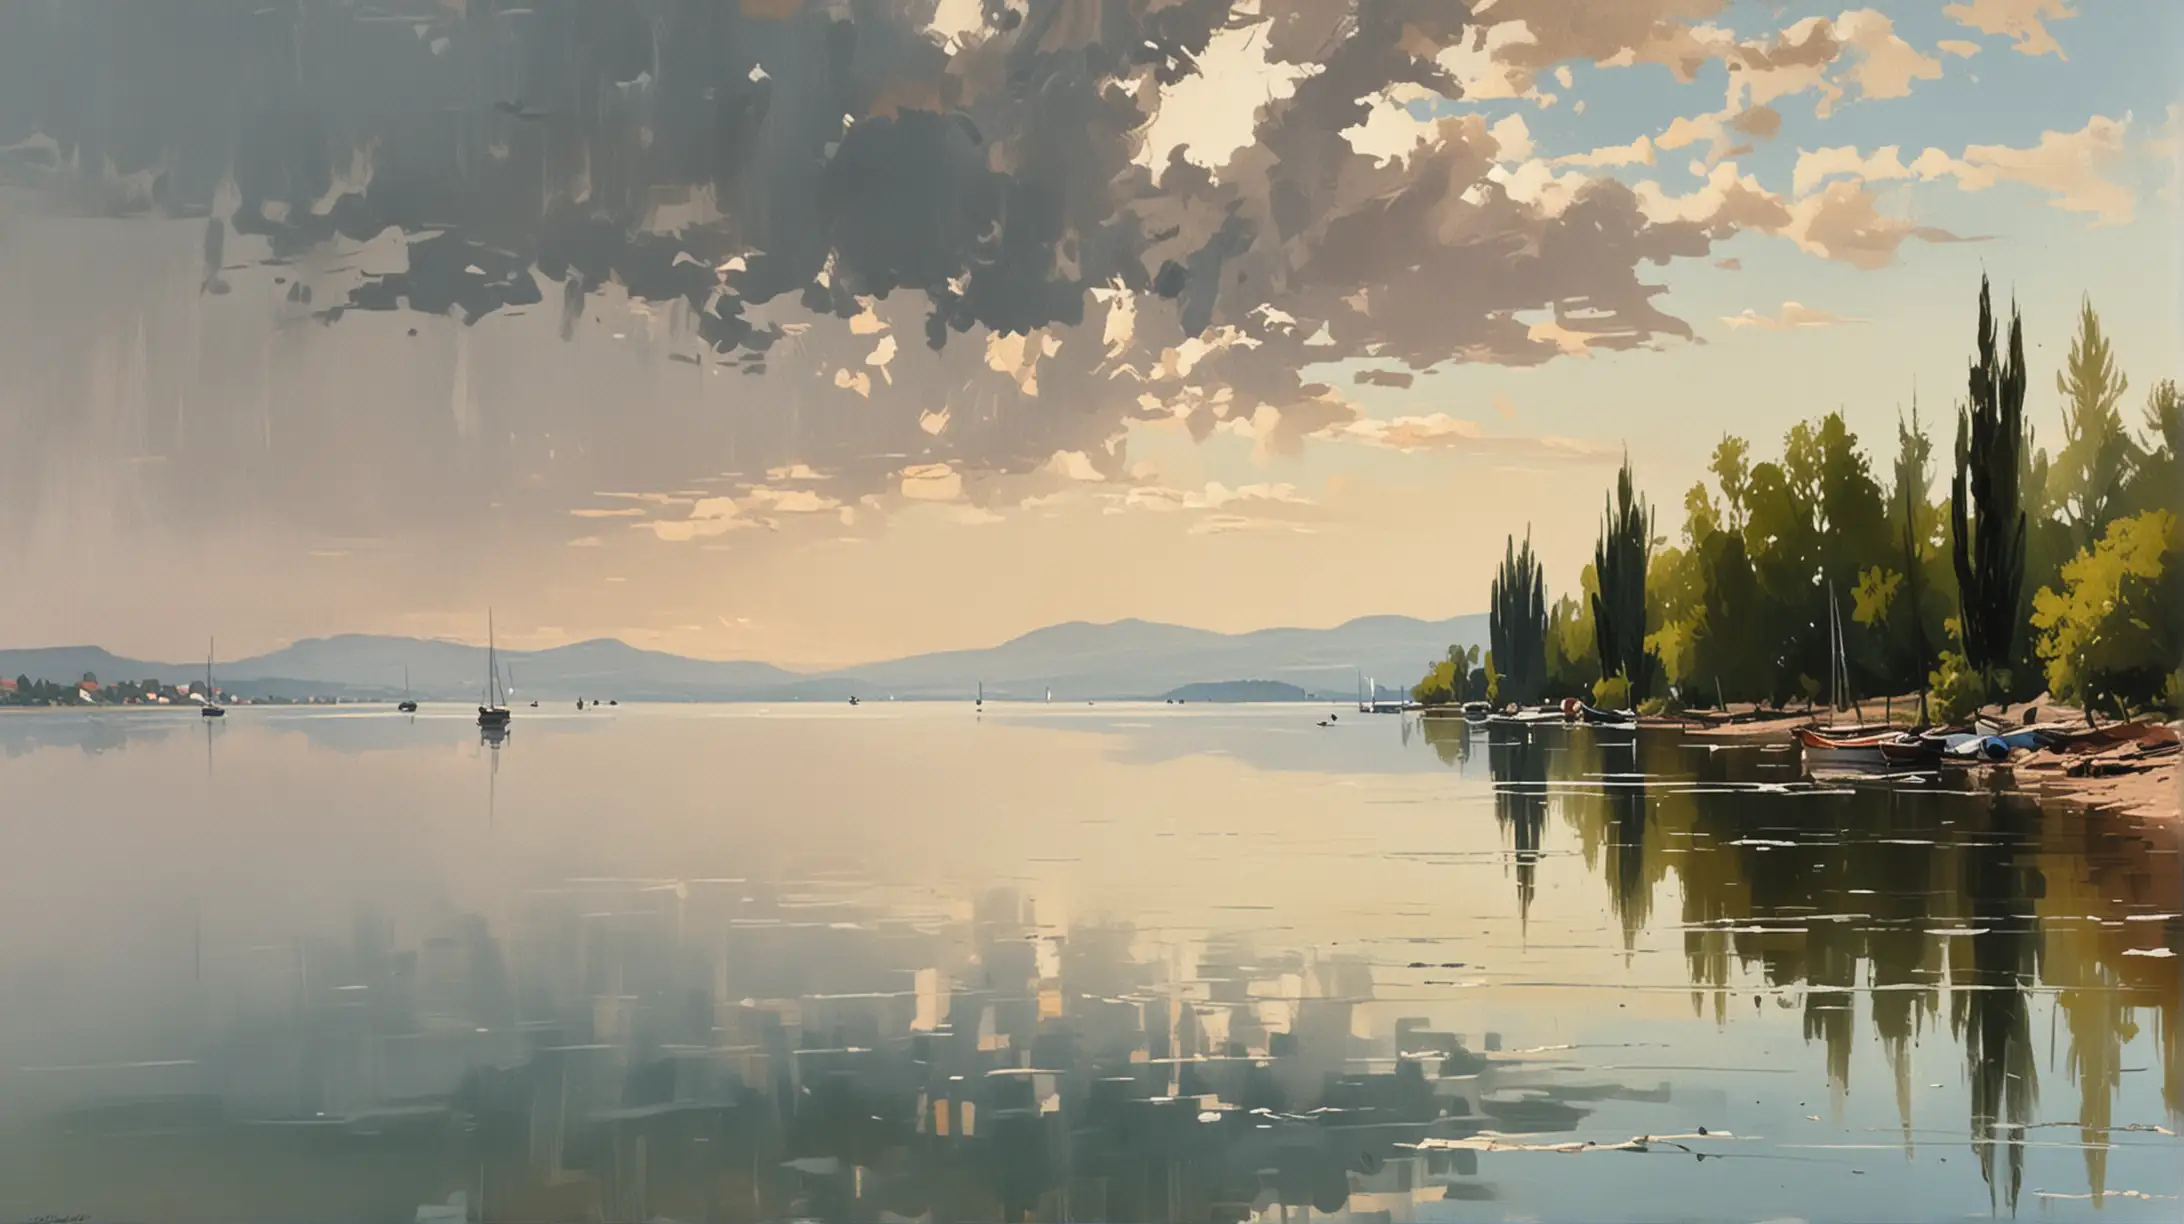 generate a painting about lake balaton in edward seago style. the colors: white, brown,black muted colors, 